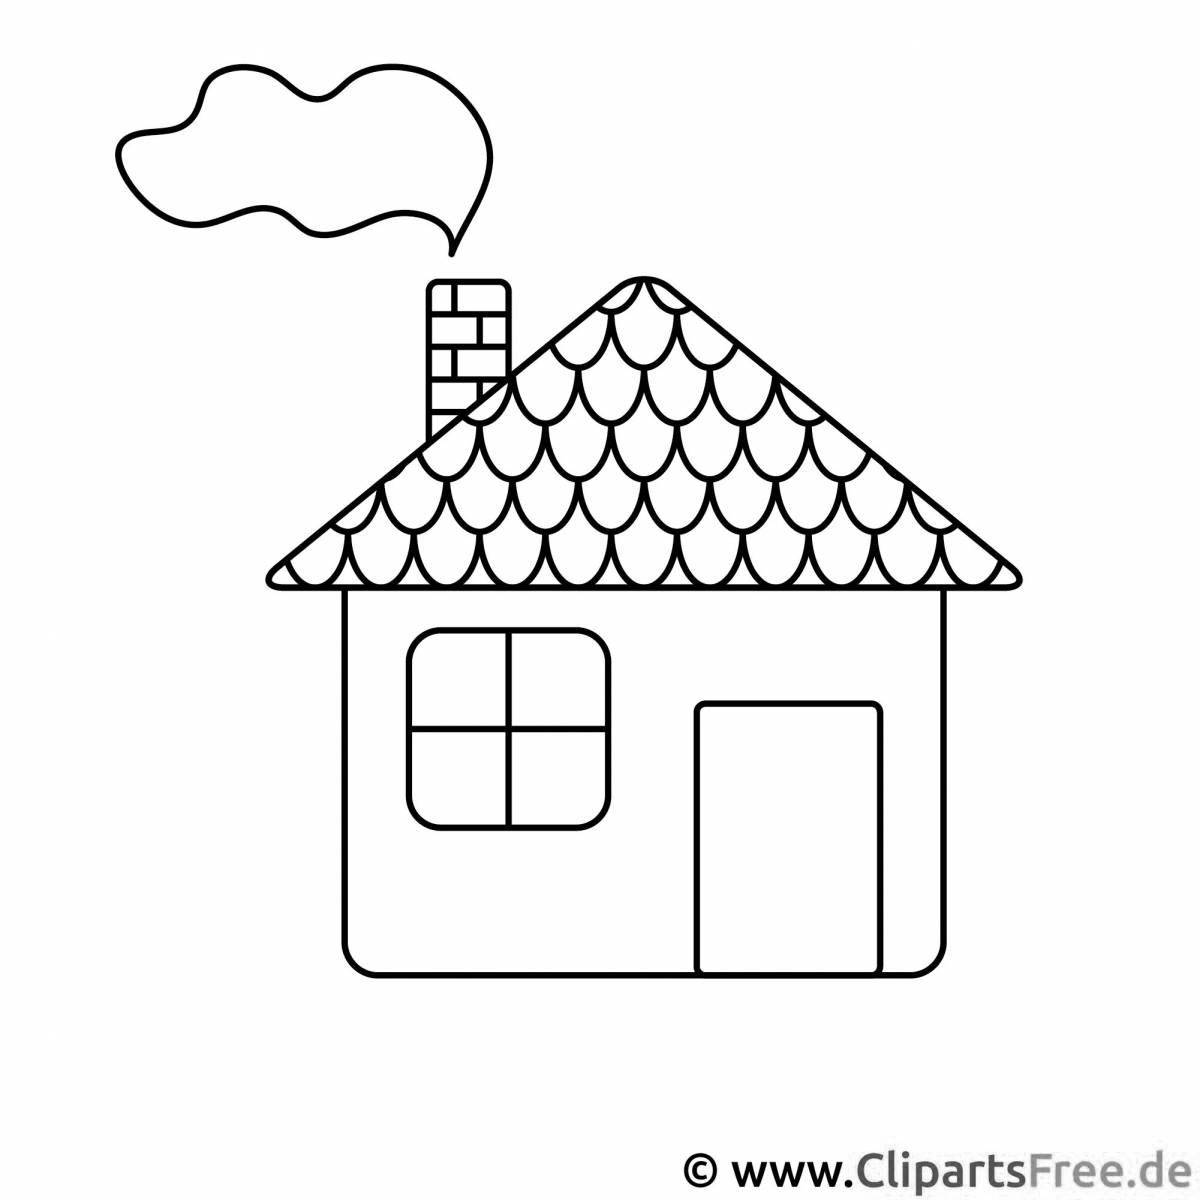 Cute house roof coloring page